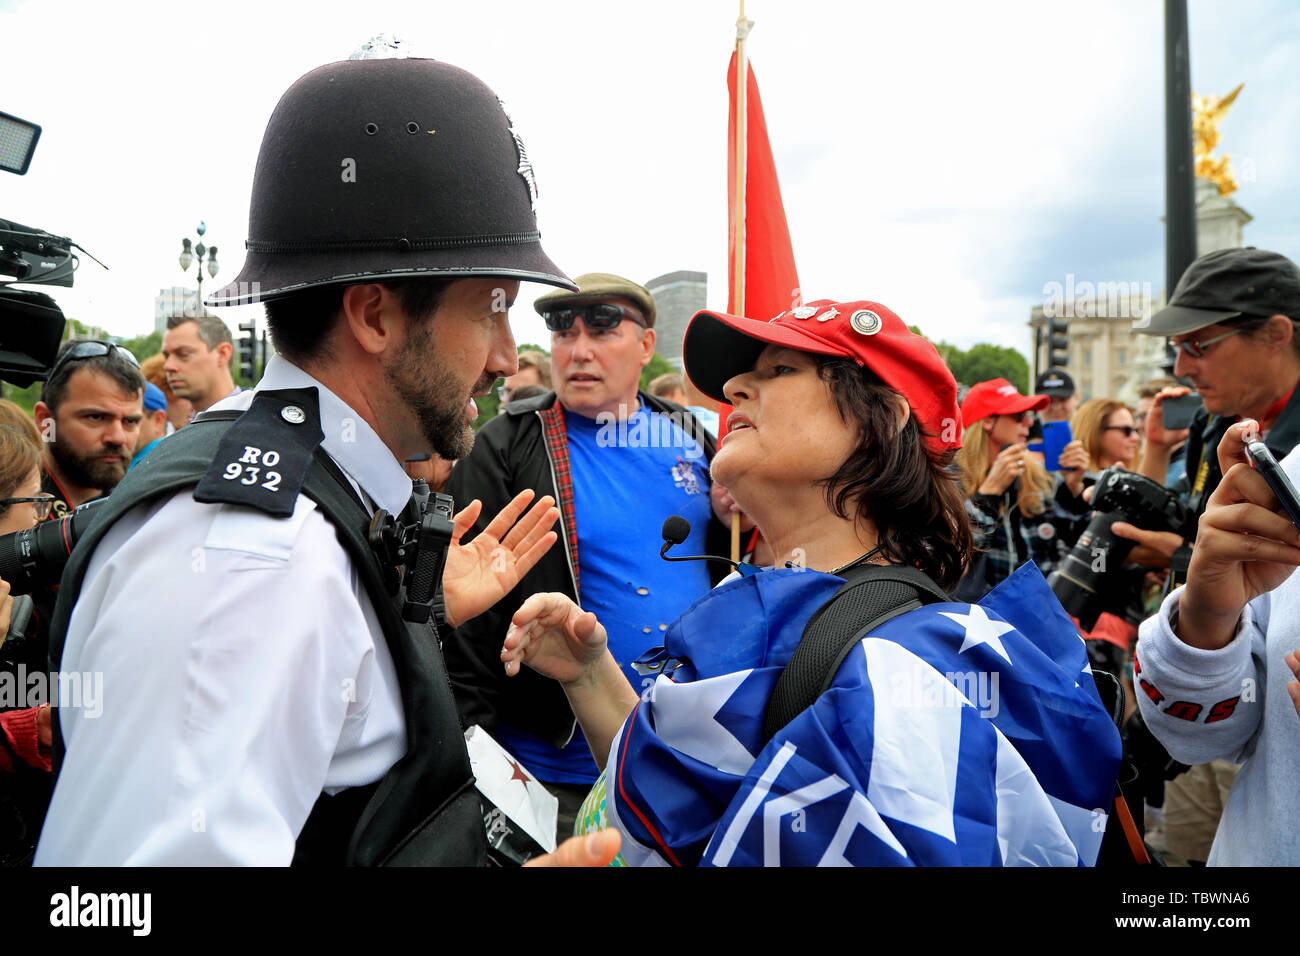 A police officer (left) intervenes to break up a heated debate between a protester and a Trump supporter (right) outside Buckingham Palace, London, during the first day of a state visit to the UK by US President Donald Trump. Stock Photo